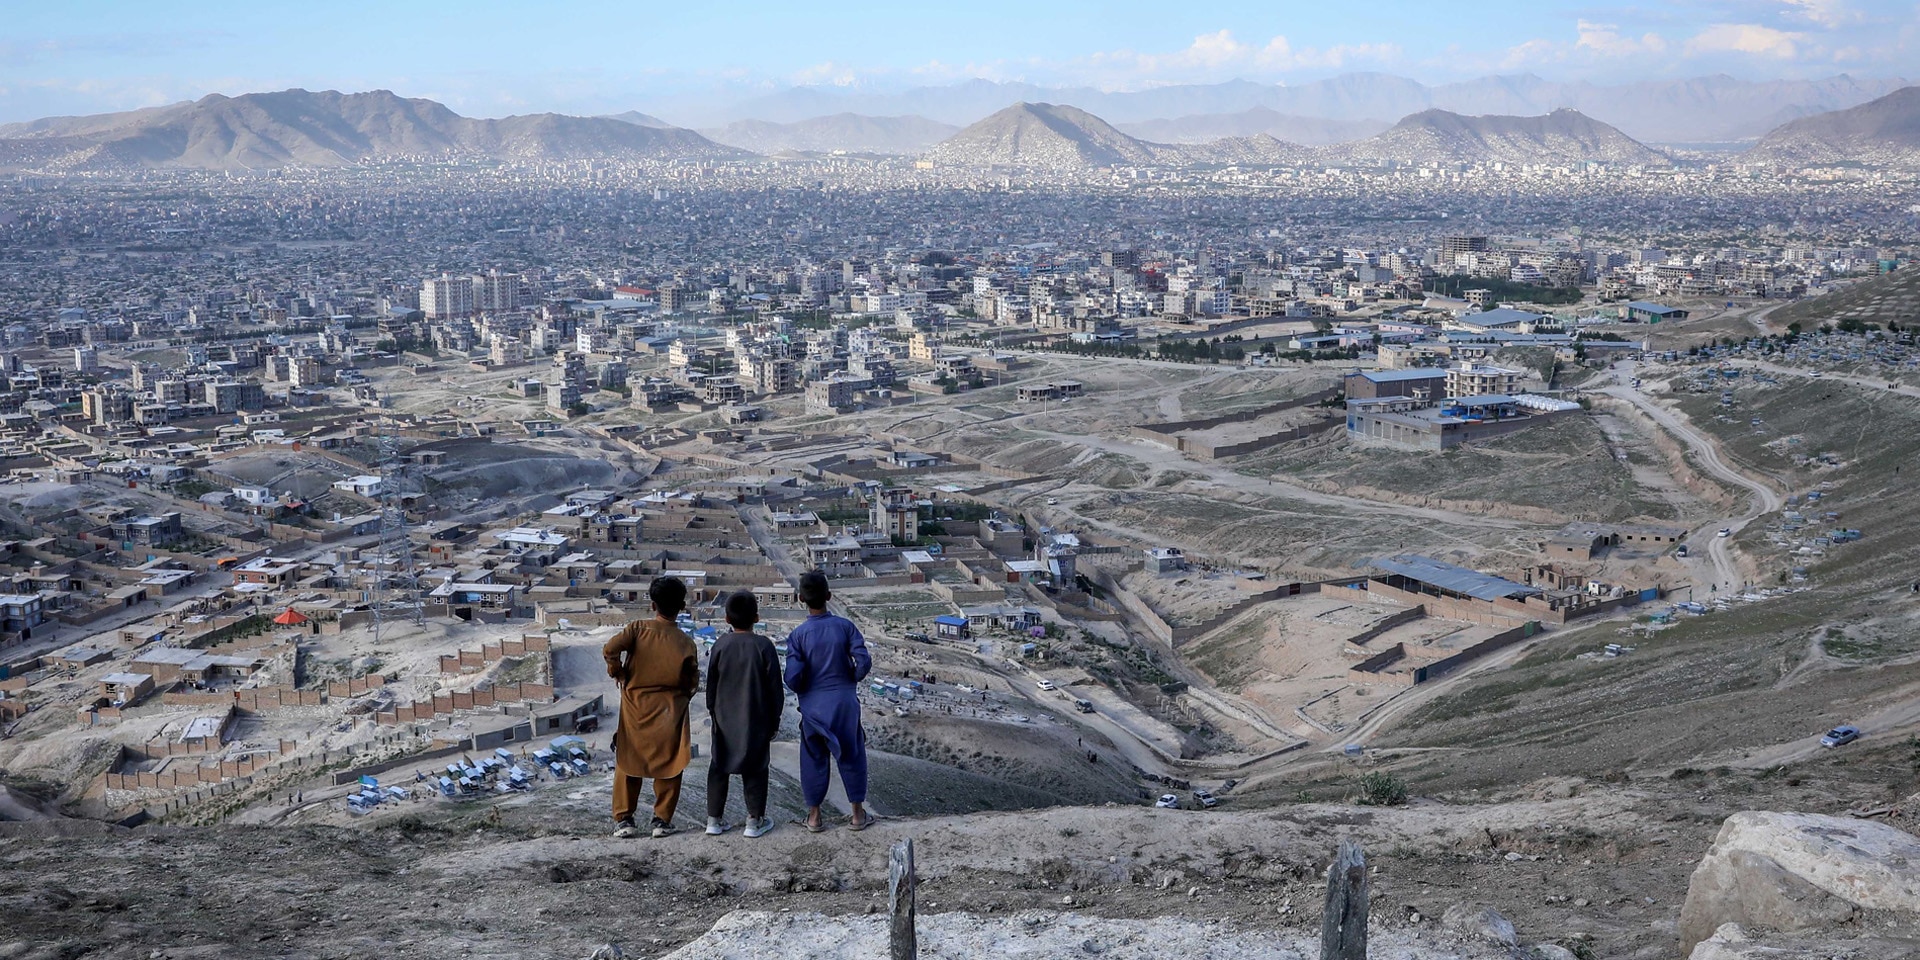  Three children look down on the Afghan capital Kabul from a hill.